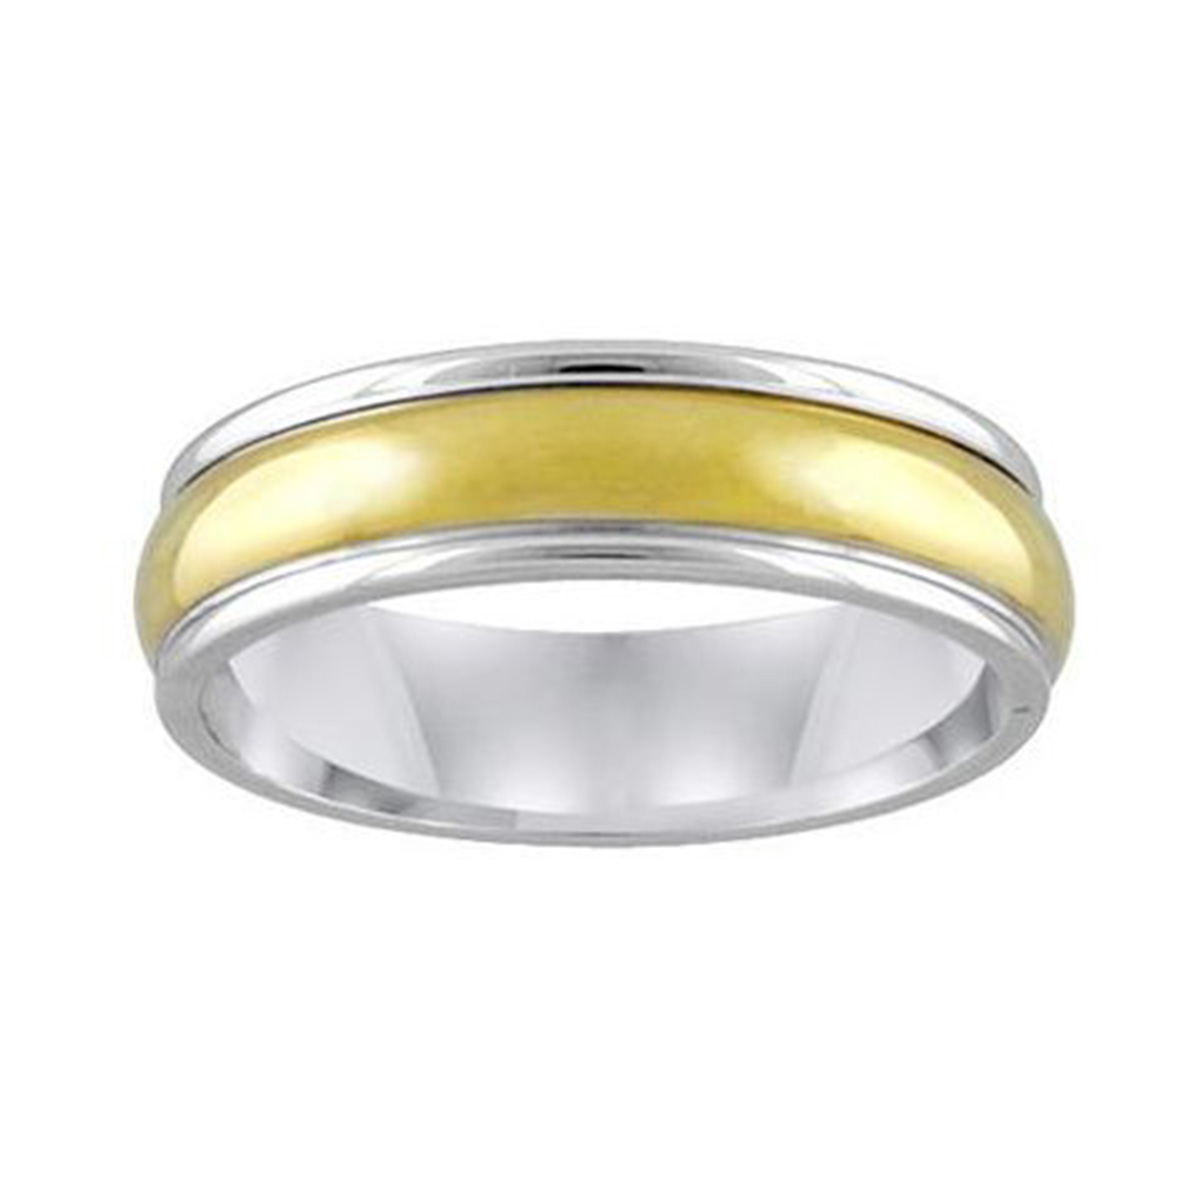 ArtCarved Two Tone Gold High Polish 6mm Wedding Band, Size